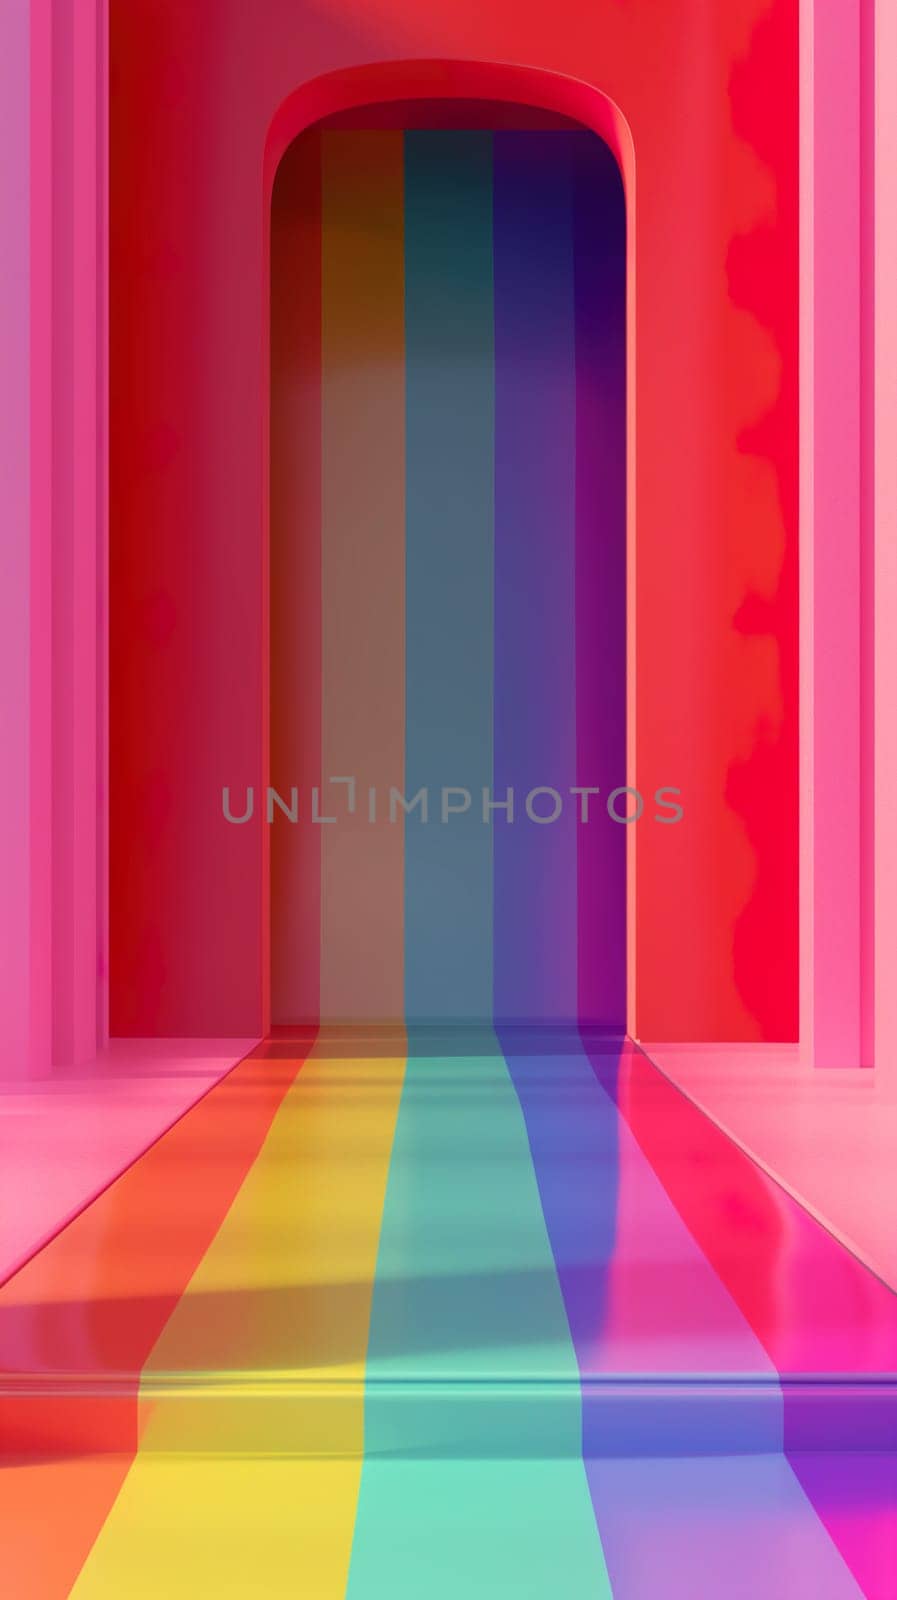 Colorful arch lgbt symbol background by Dustick